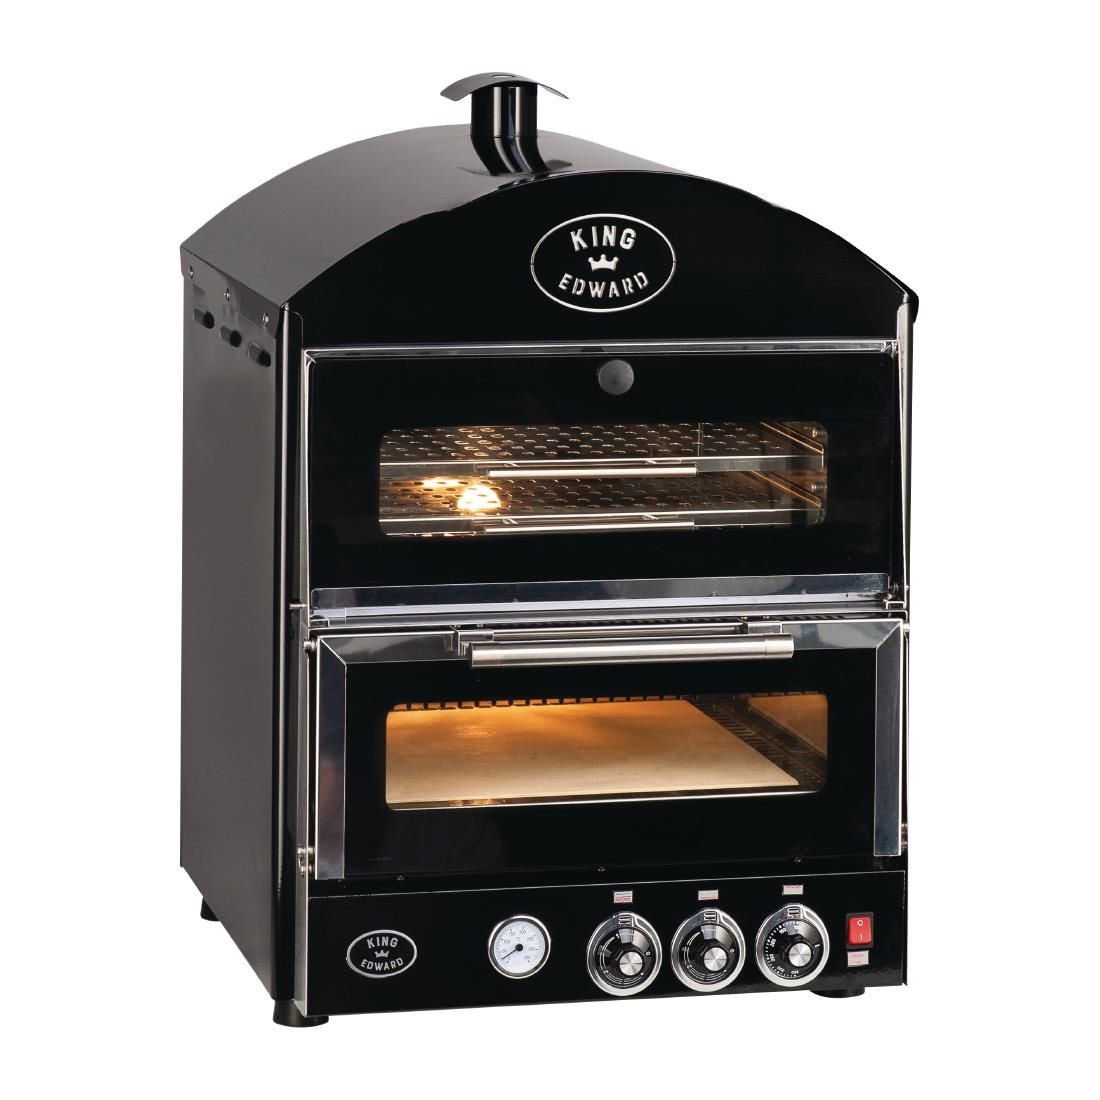 DY471 King Edward Pizza King Oven and Warmer PK1W/BLK JD Catering Equipment Solutions Ltd